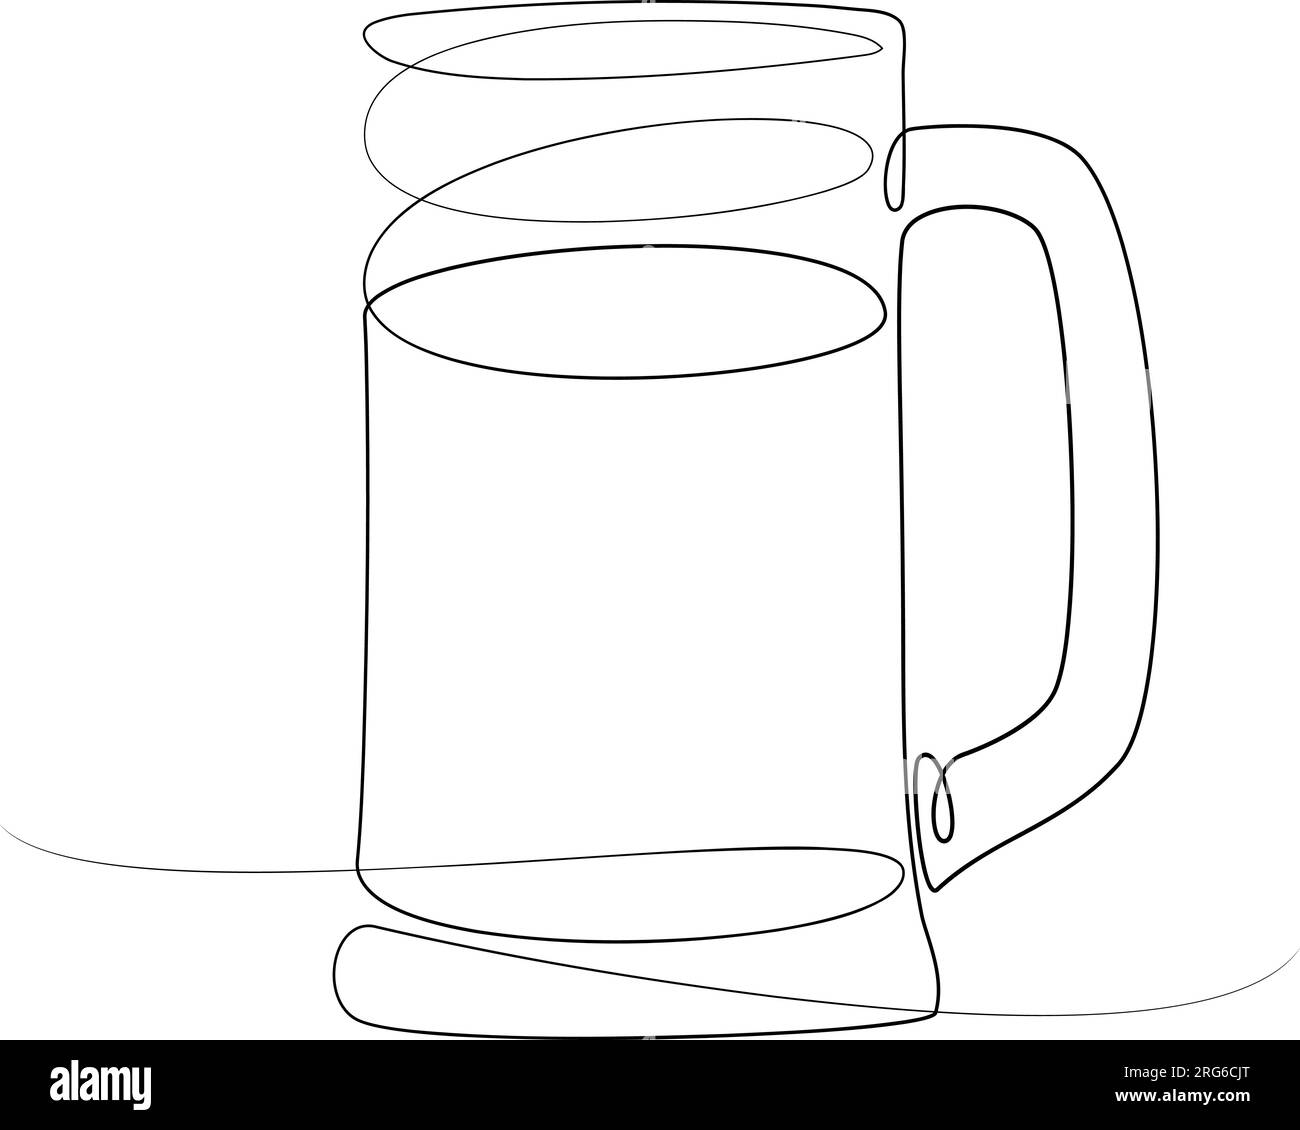 Outline drawing of a beer mug with one continuous line in a minimalist style. Sticker. Icon. Isolate. Vector illustration for poster, banner, brochure, greeting or invitation cards, menu bar, logotype Stock Vector